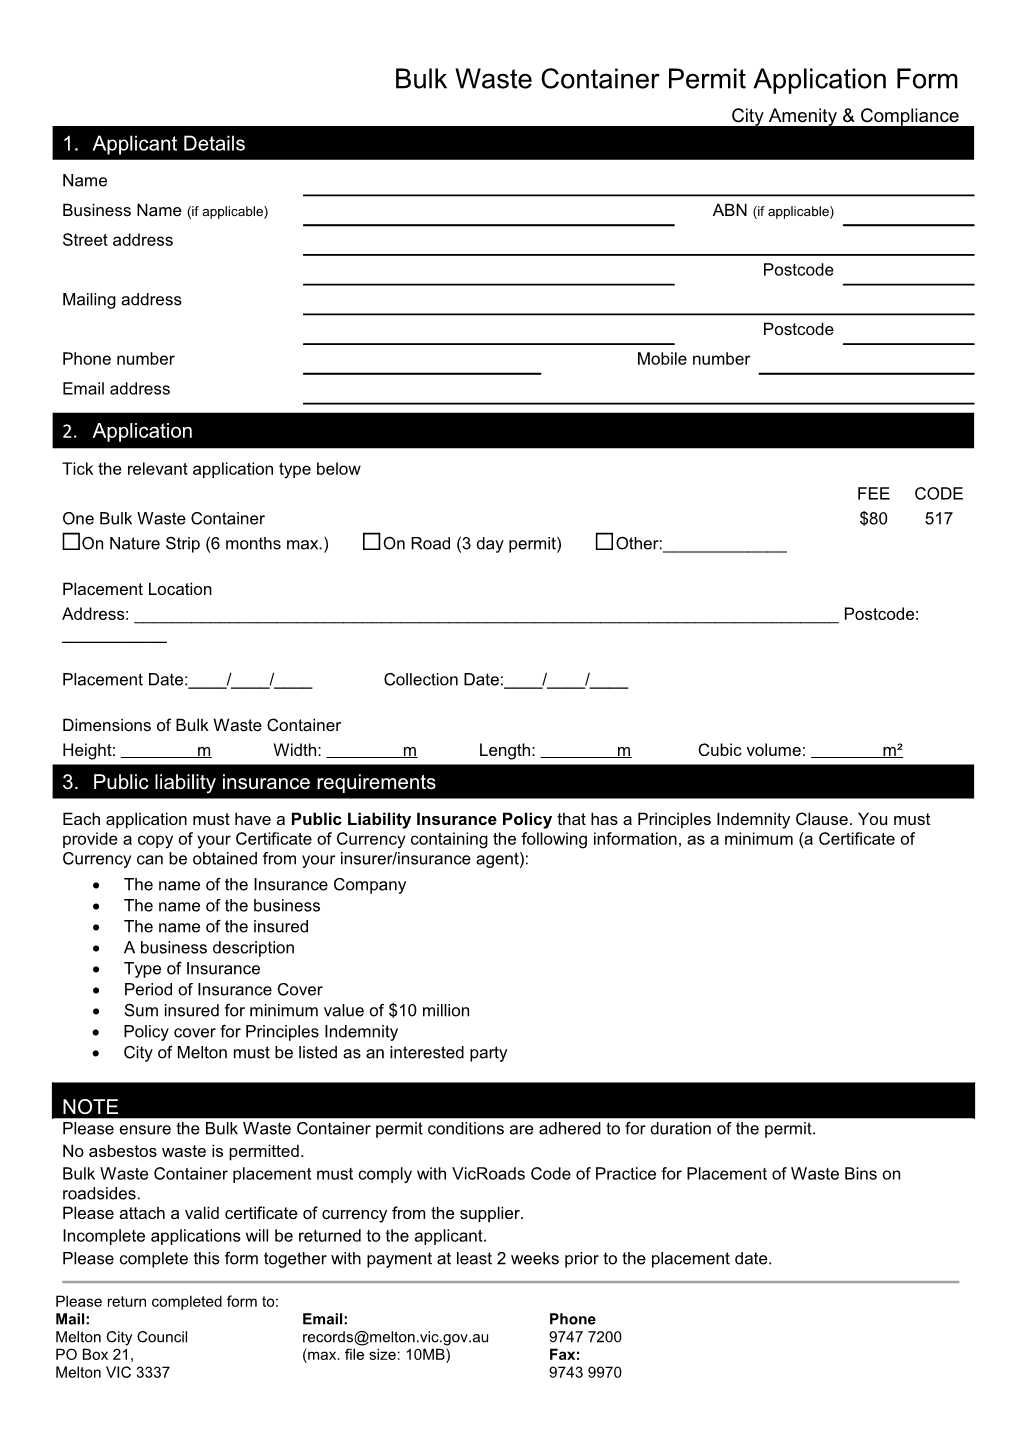 Bulk Waste Container Permit Application Form